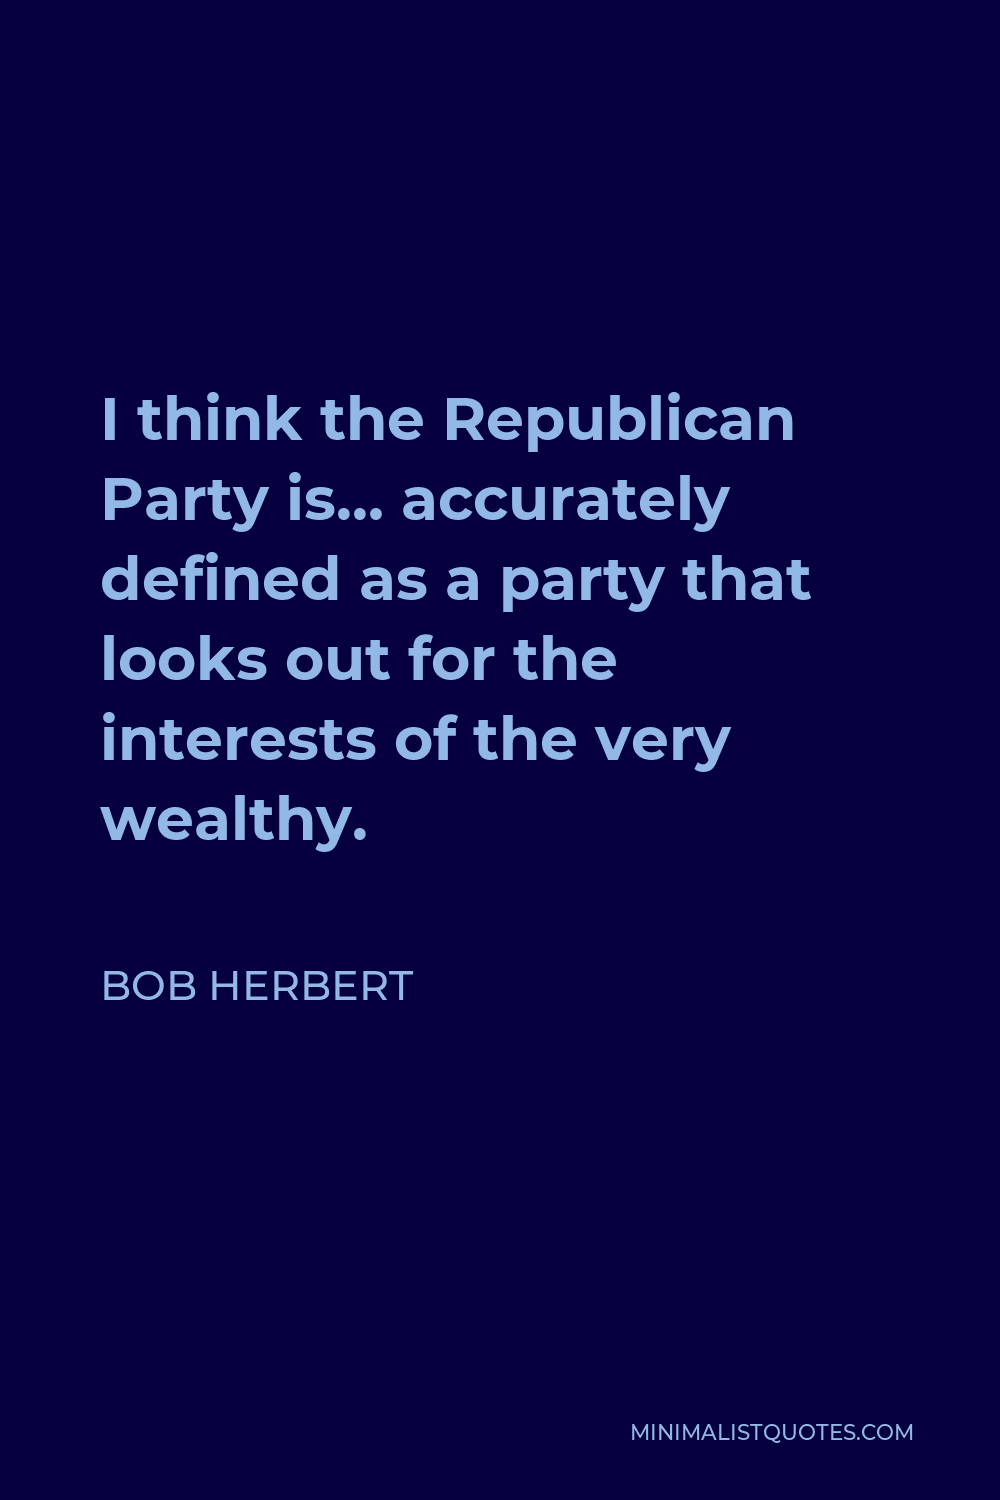 Bob Herbert Quote - I think the Republican Party is… accurately defined as a party that looks out for the interests of the very wealthy.